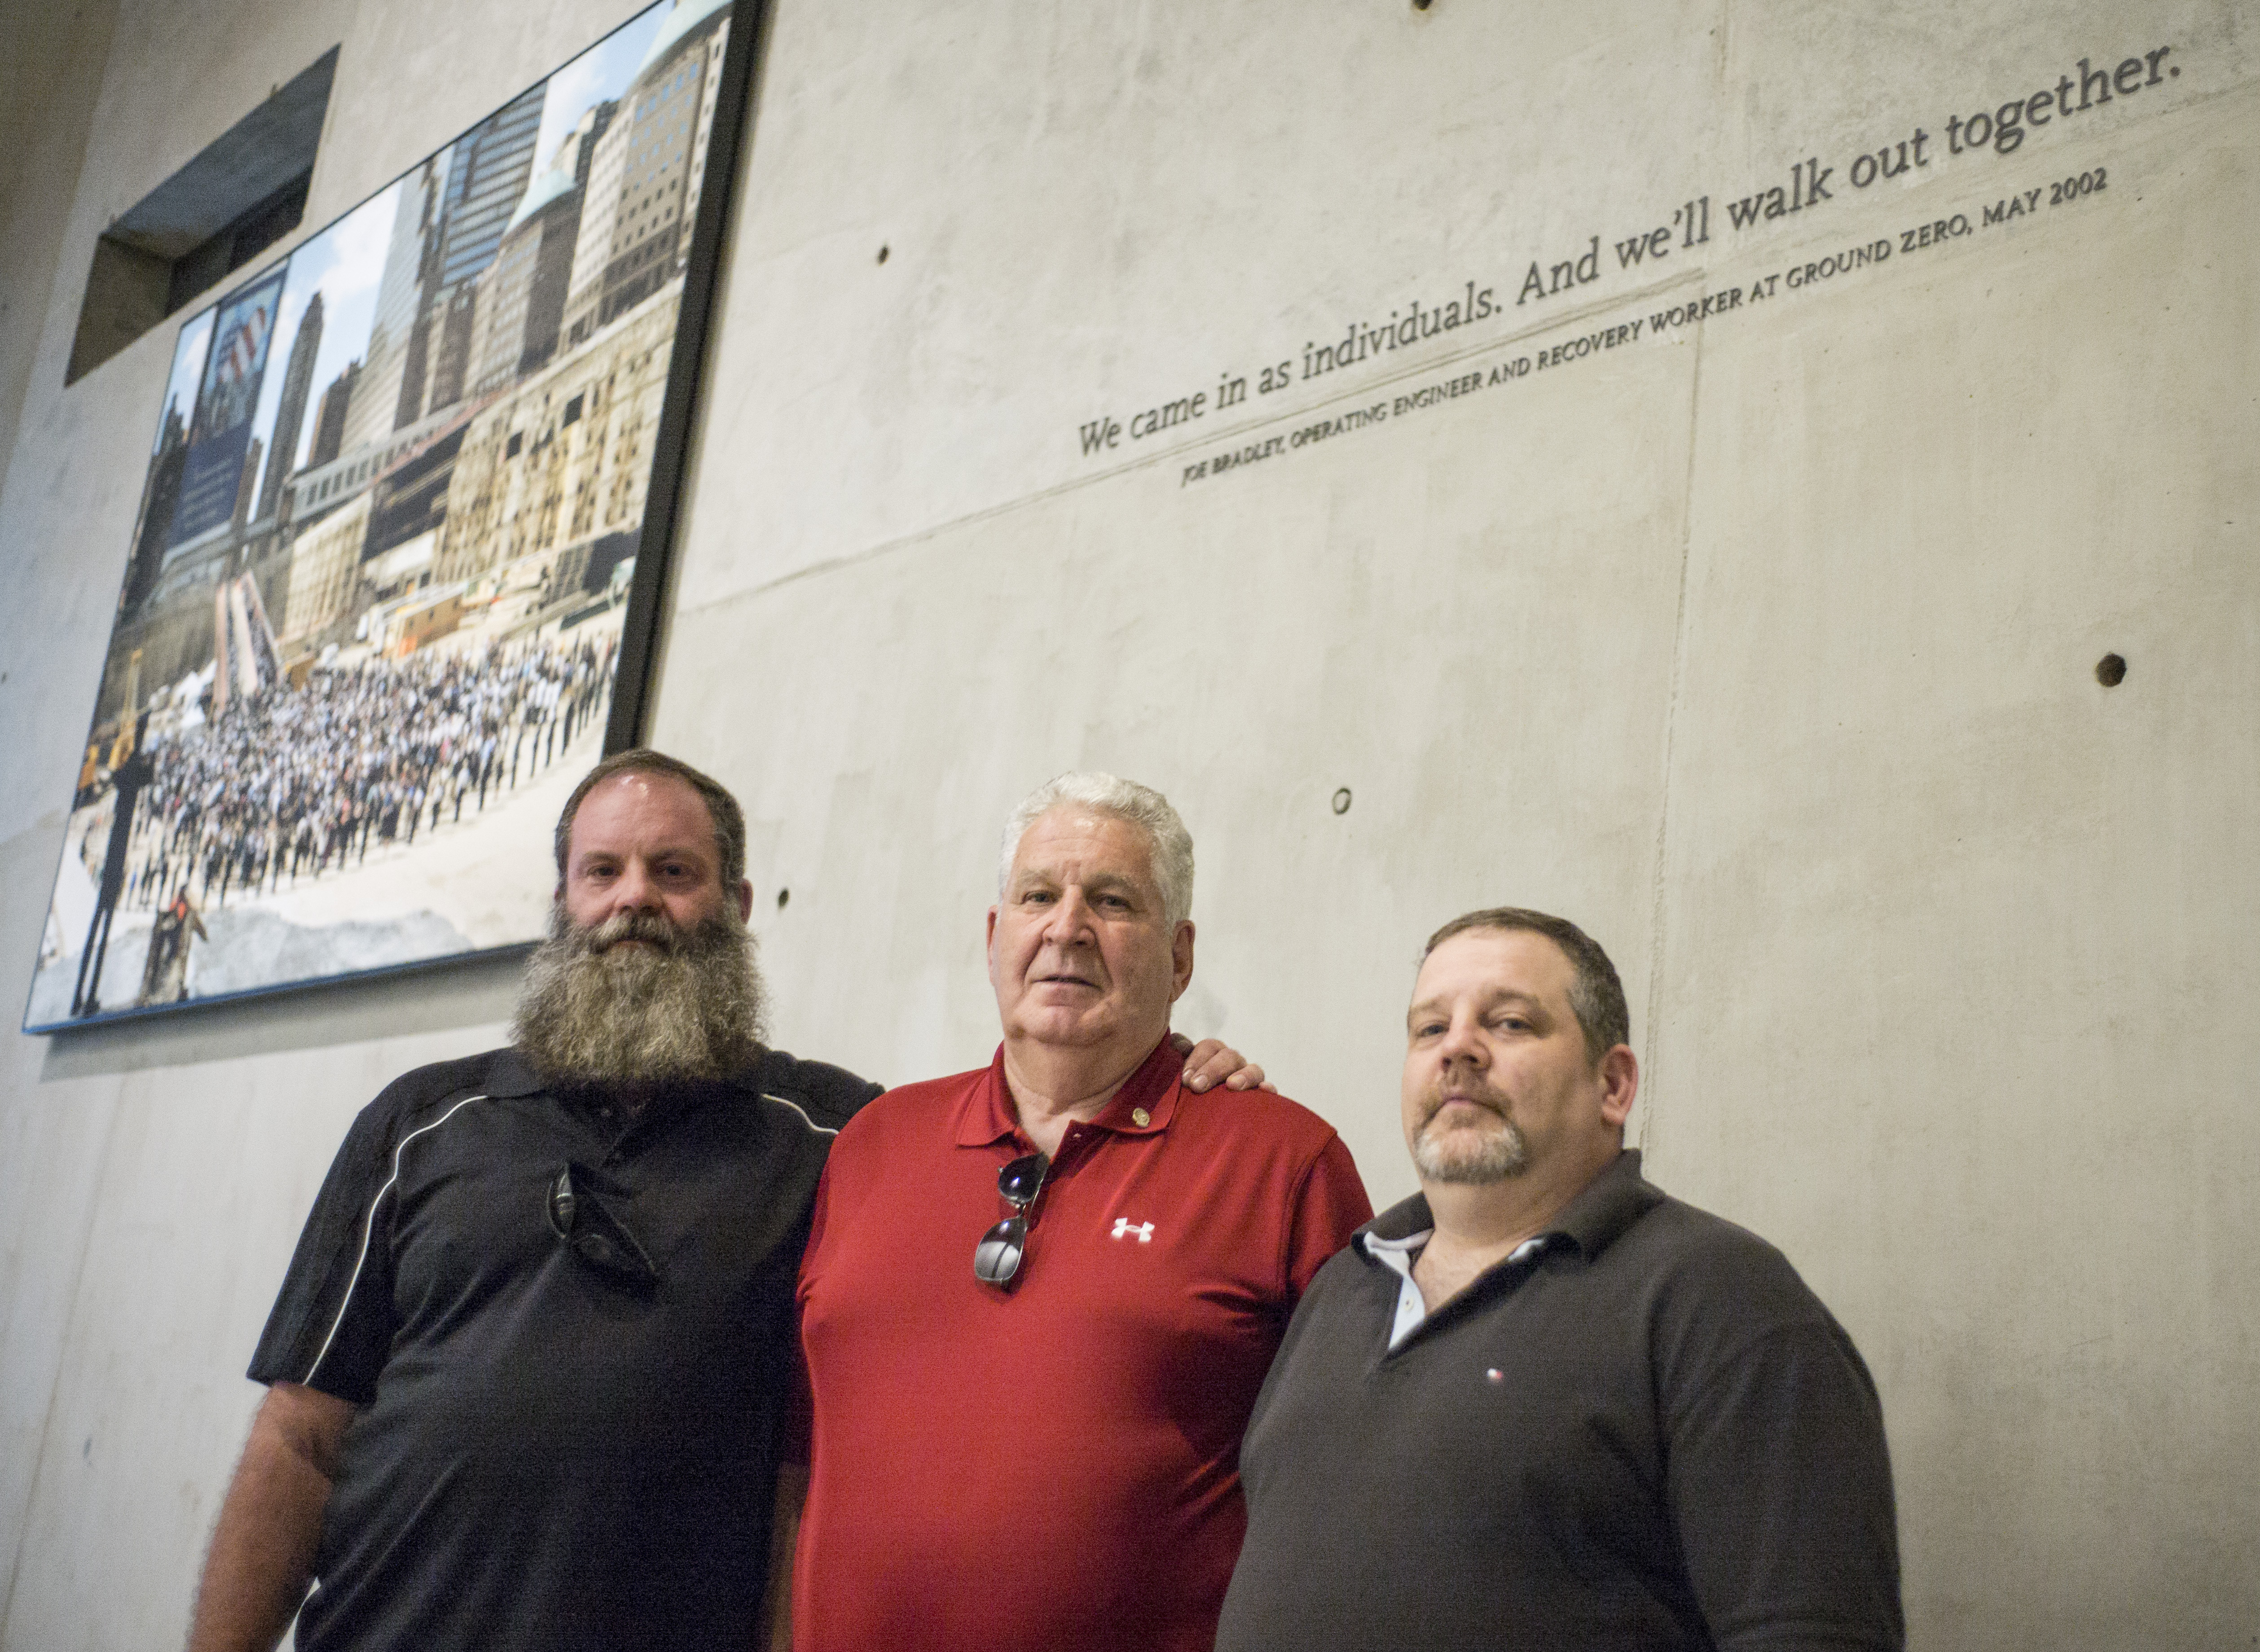 Jon, Joe and Joe Bradley Jr. visit the 9/11 Memorial Museum for a recovery worker event.